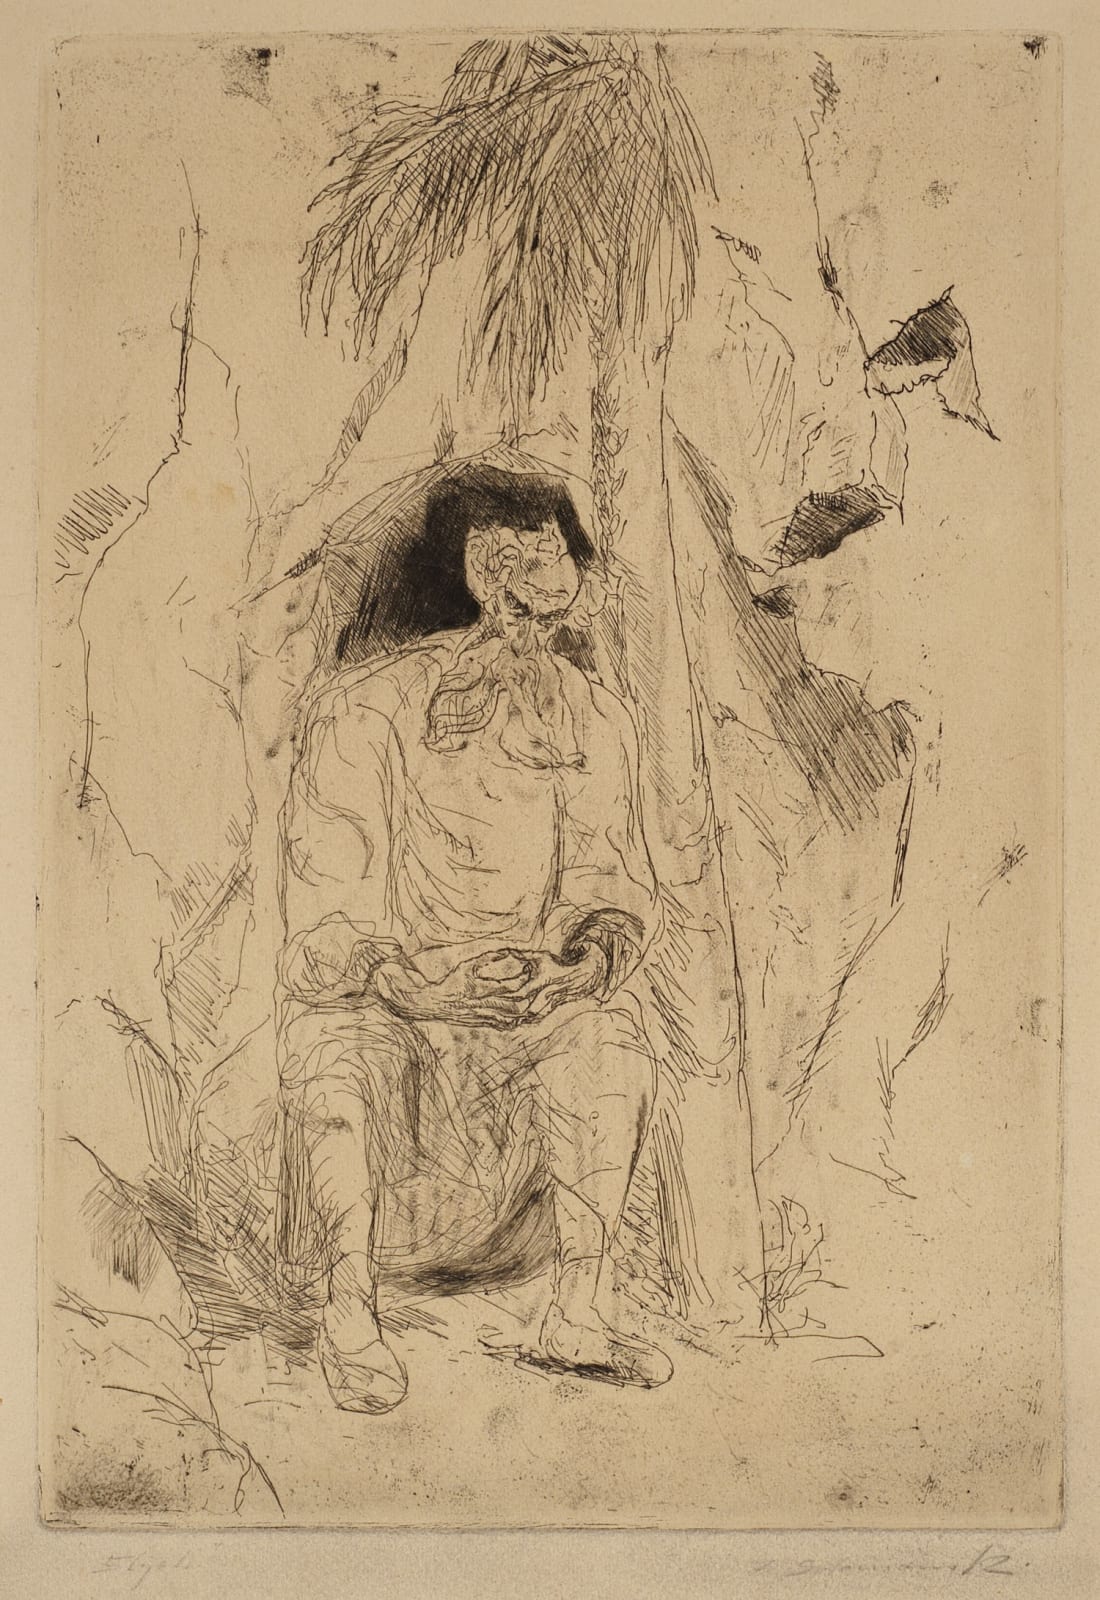 Frederick Solomonski (1899-1980) Elijah 1940 Etching on paper 38.5 x 26.5 cm Ben Uri Collection © Frederick Solomonski To see and discover more about this artist click here